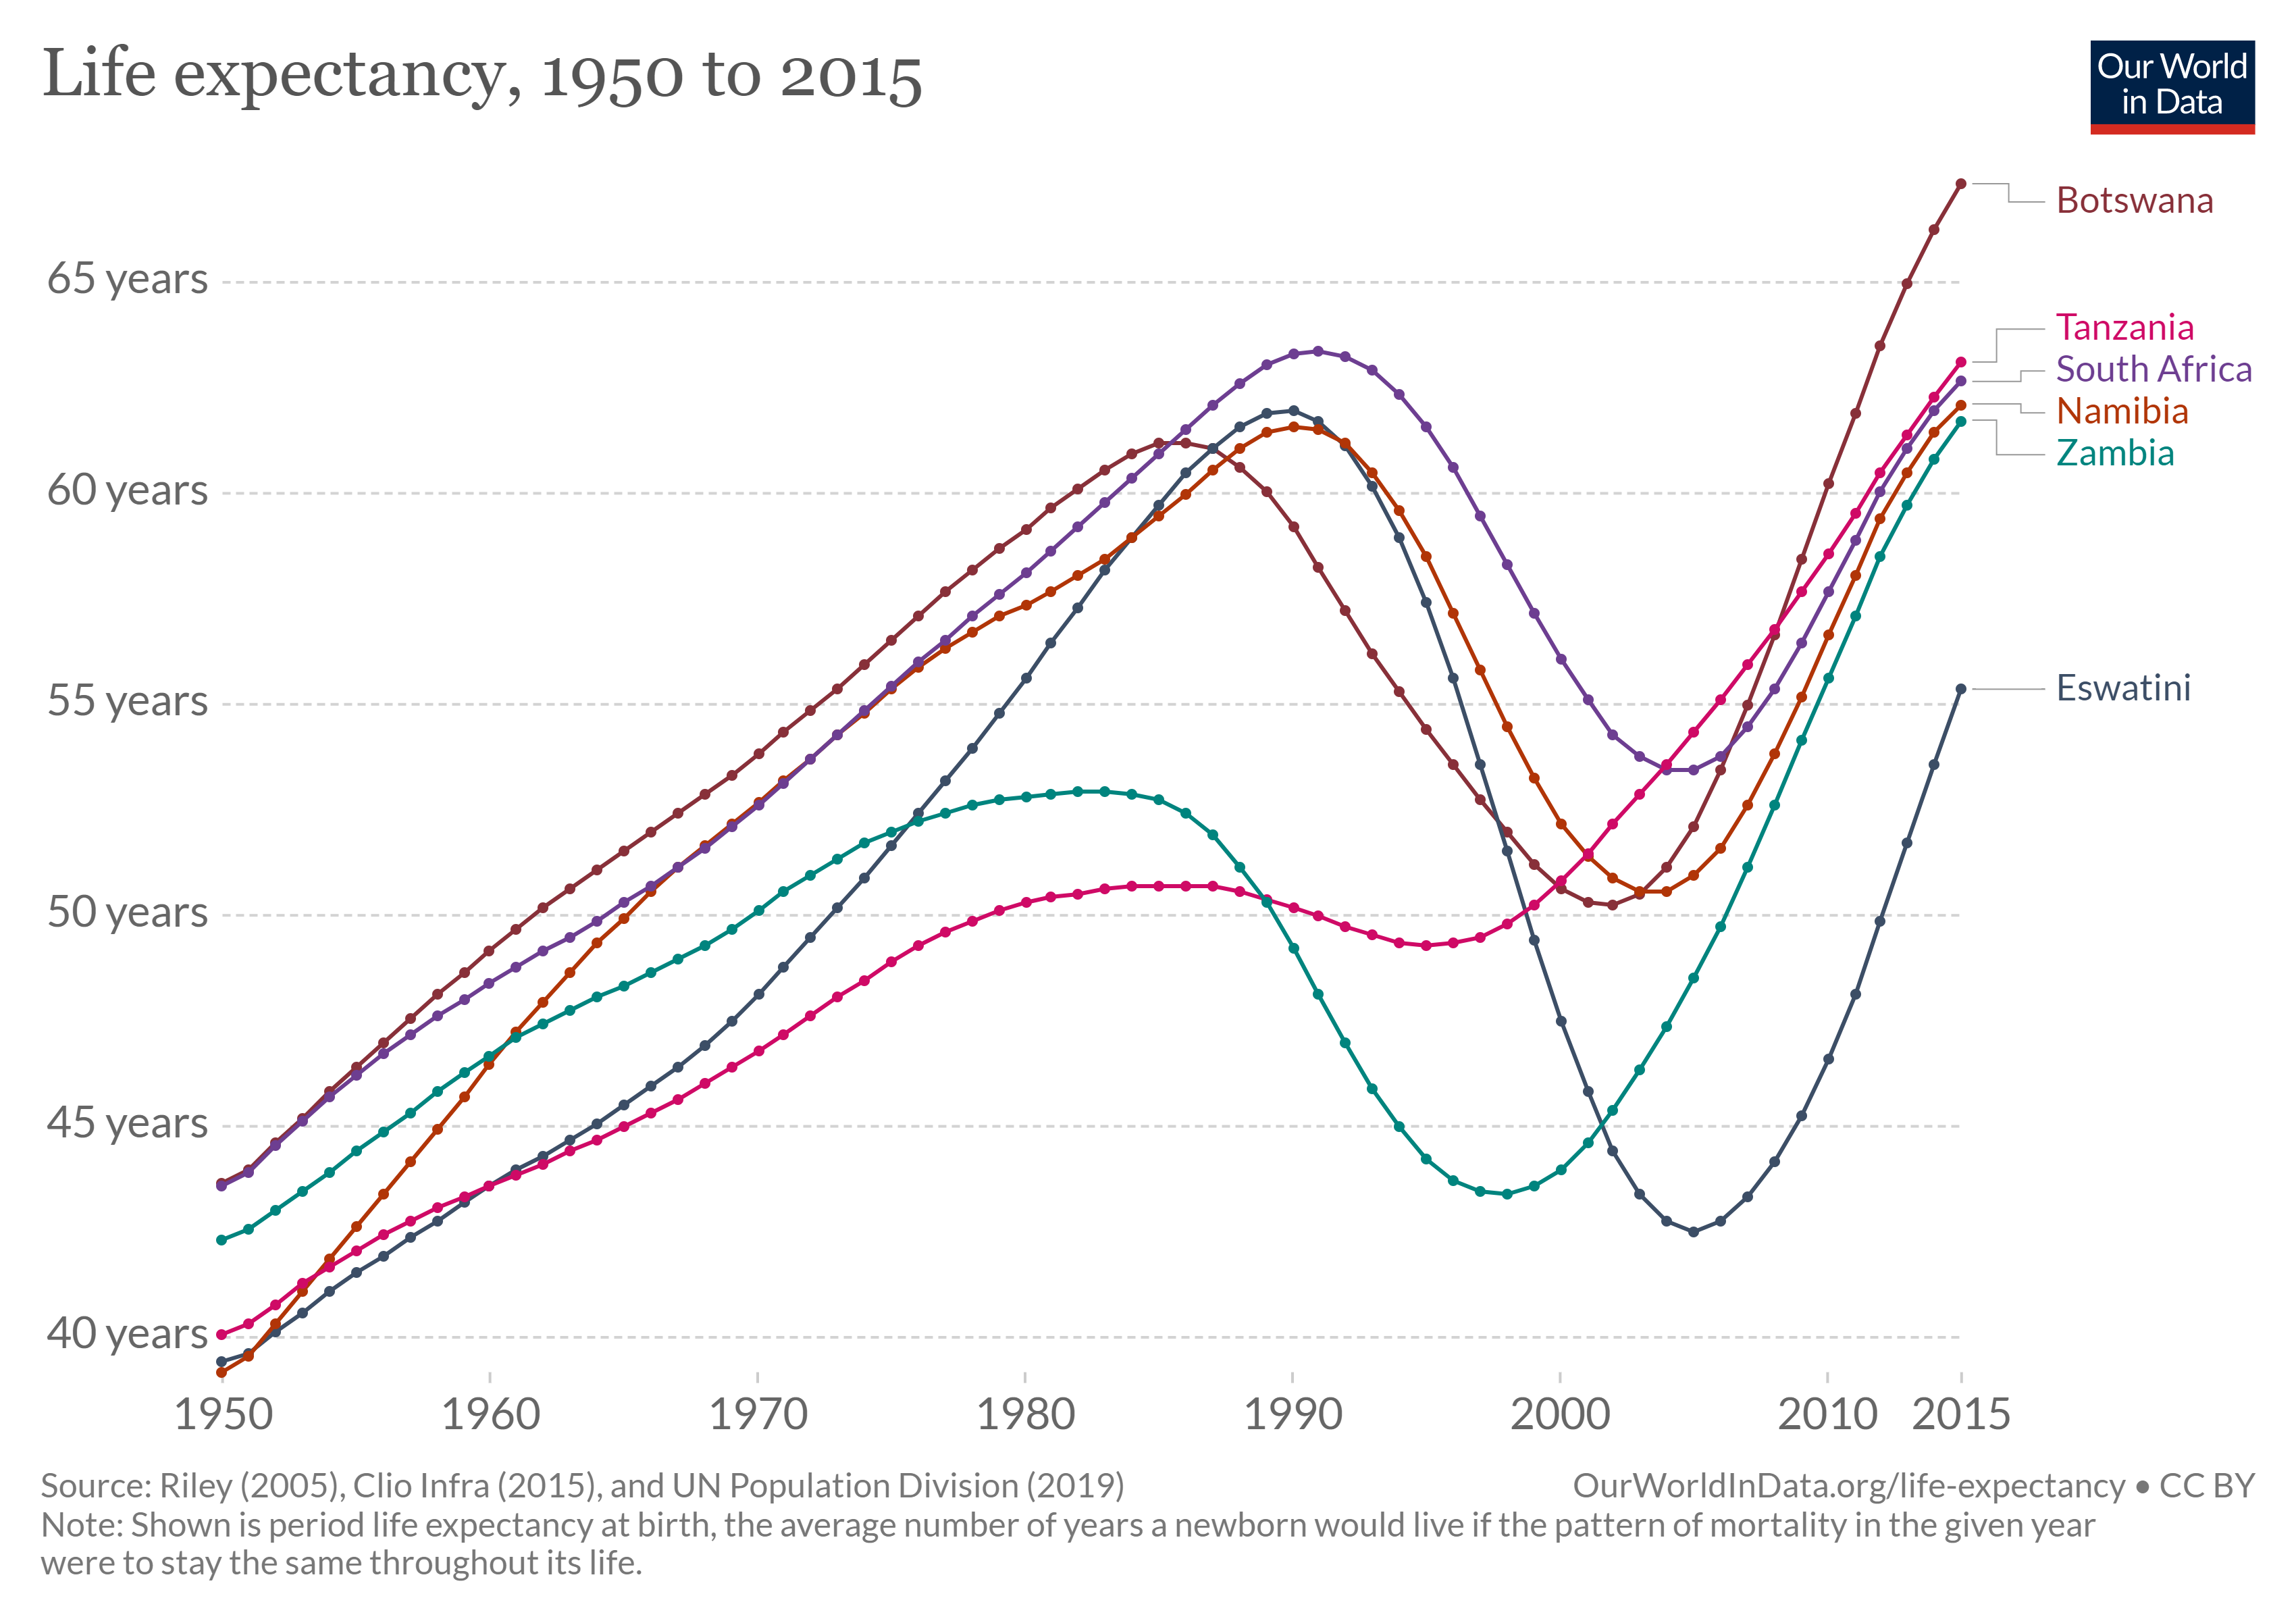 Line graph of life expectancy in Botswana, Tanzania, South Africa, Namibia, Zambia, and Eswatini over time 